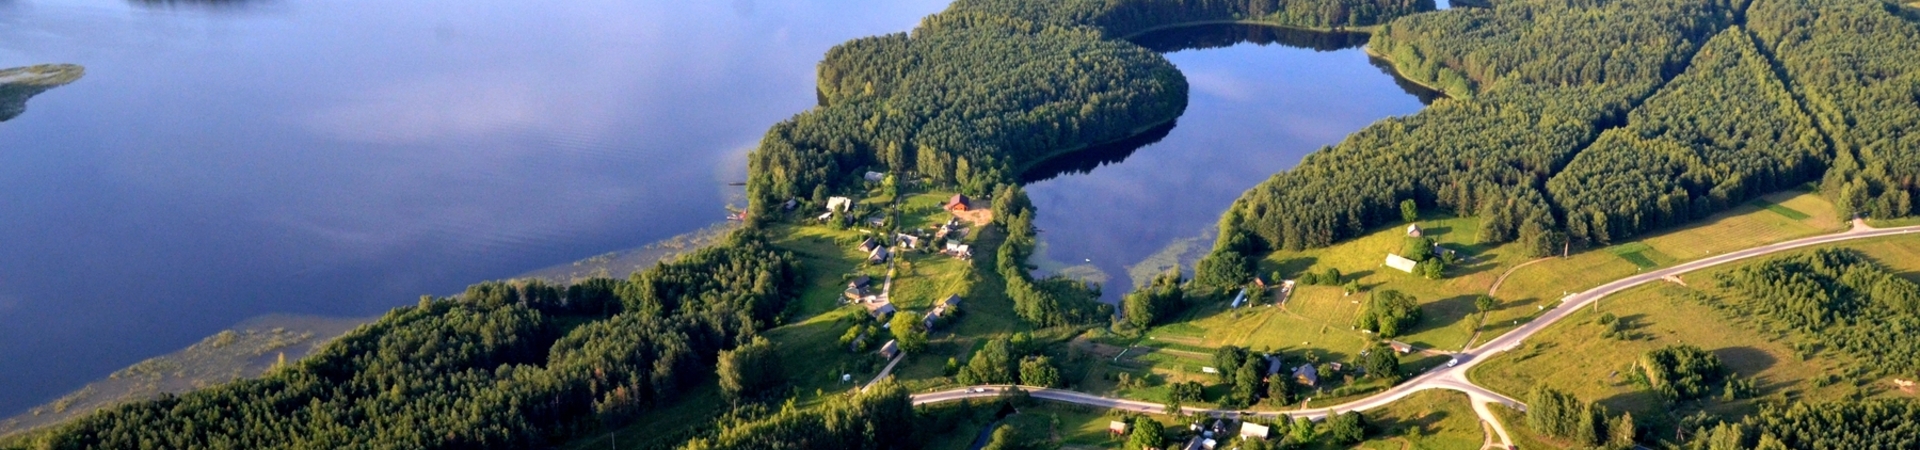 Eco-tourism in Latvia and Lithuania